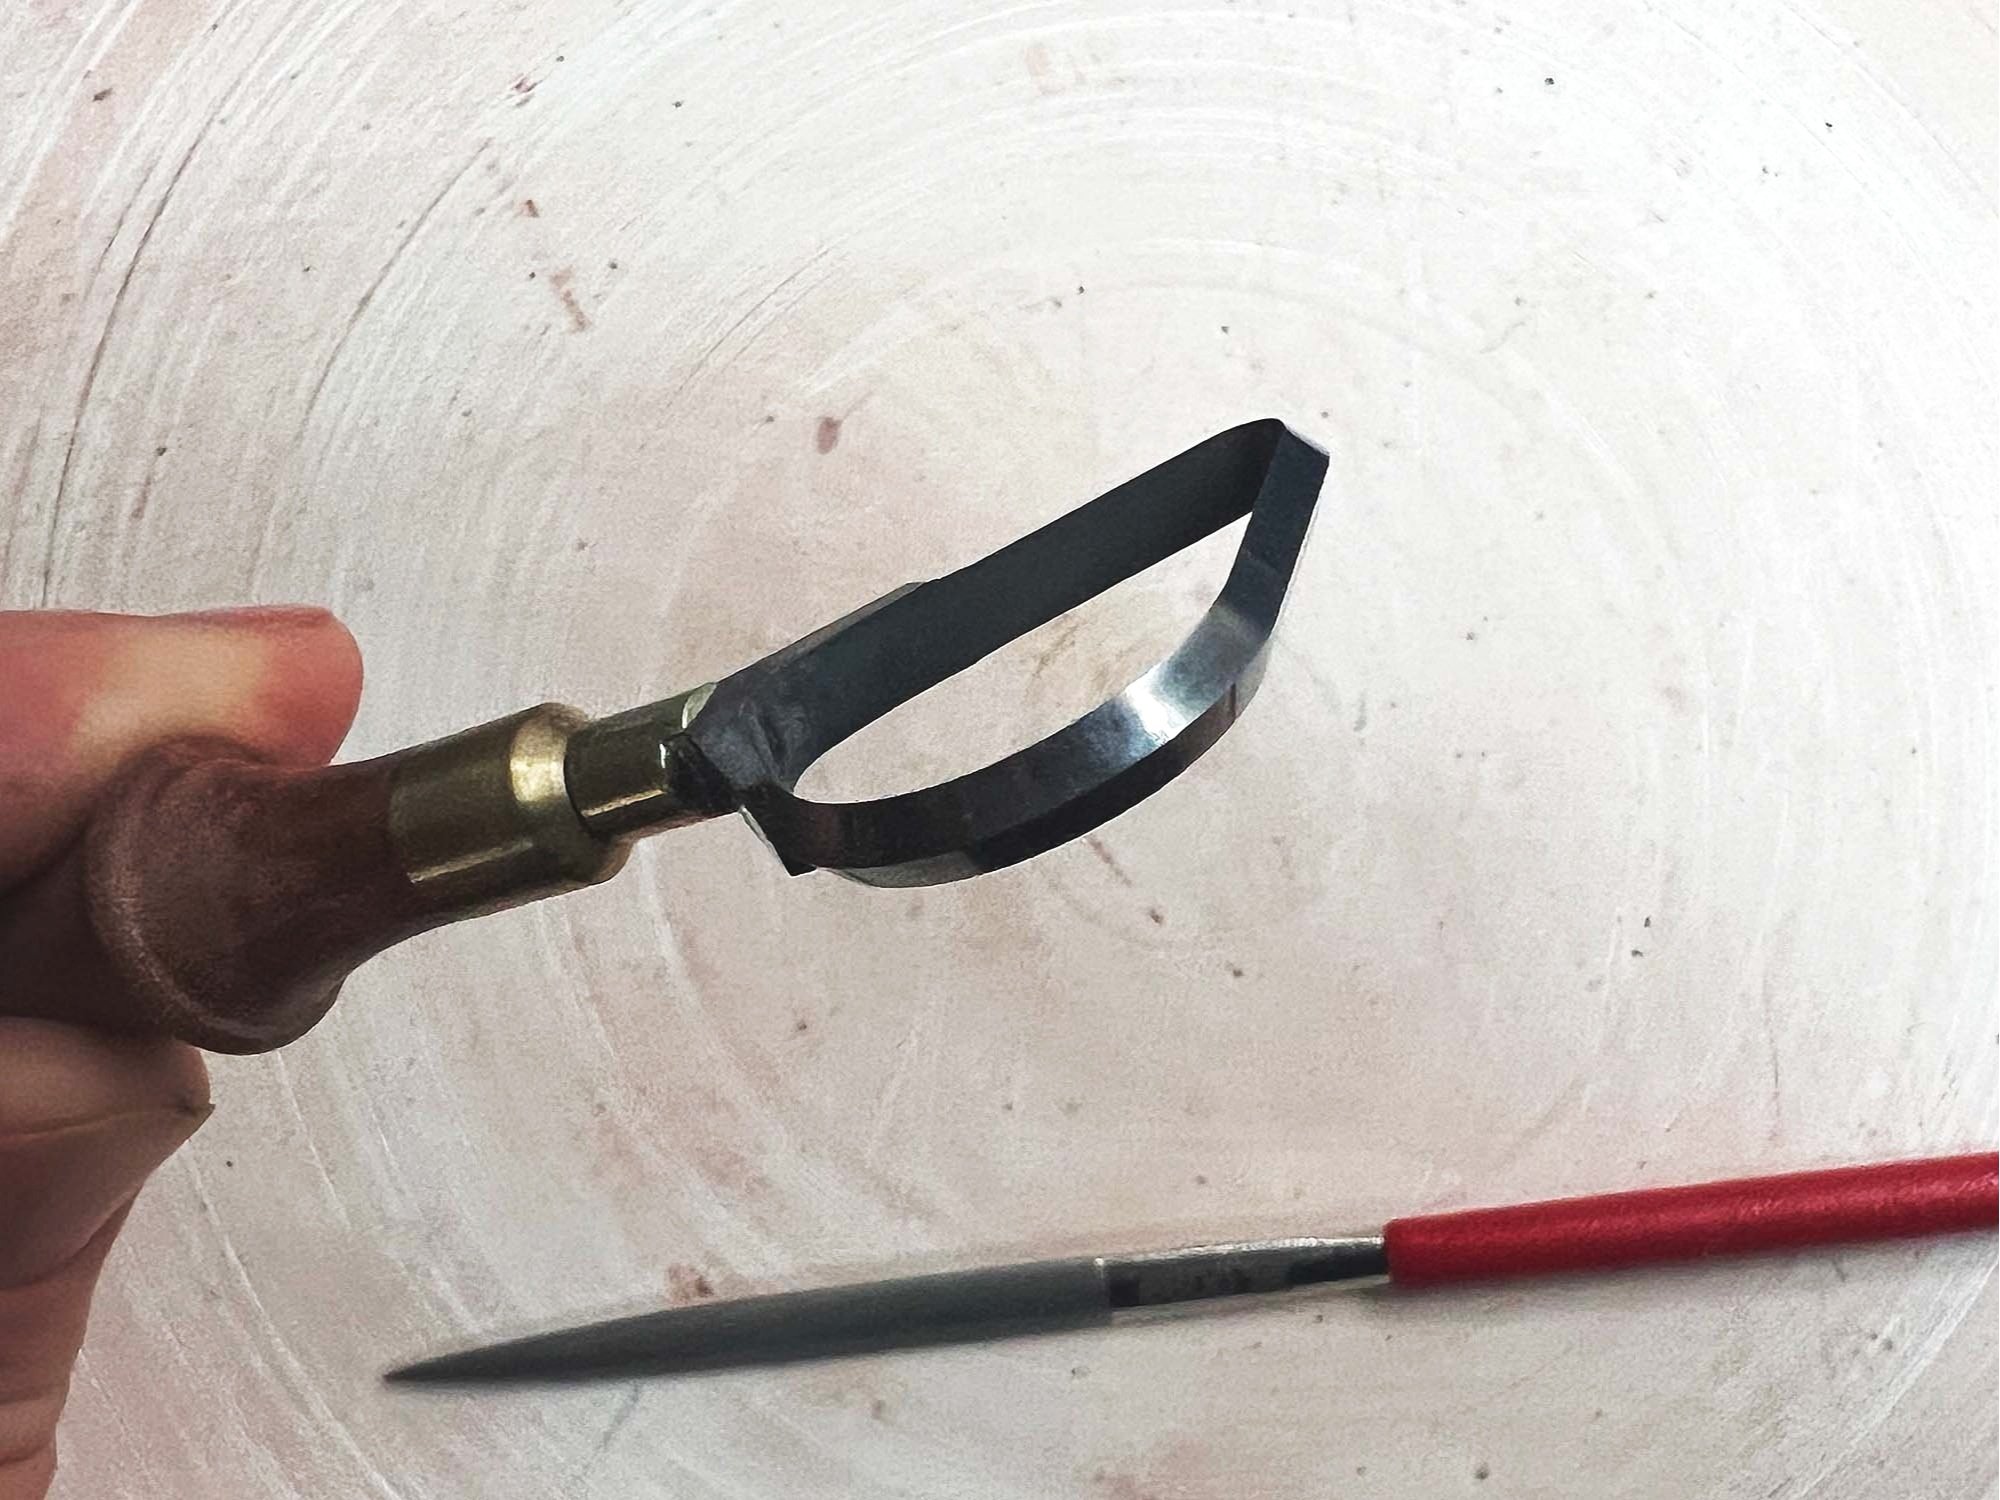 Groovy Tools: Pottery Trimming Tool #203: Compare To Dolan 345